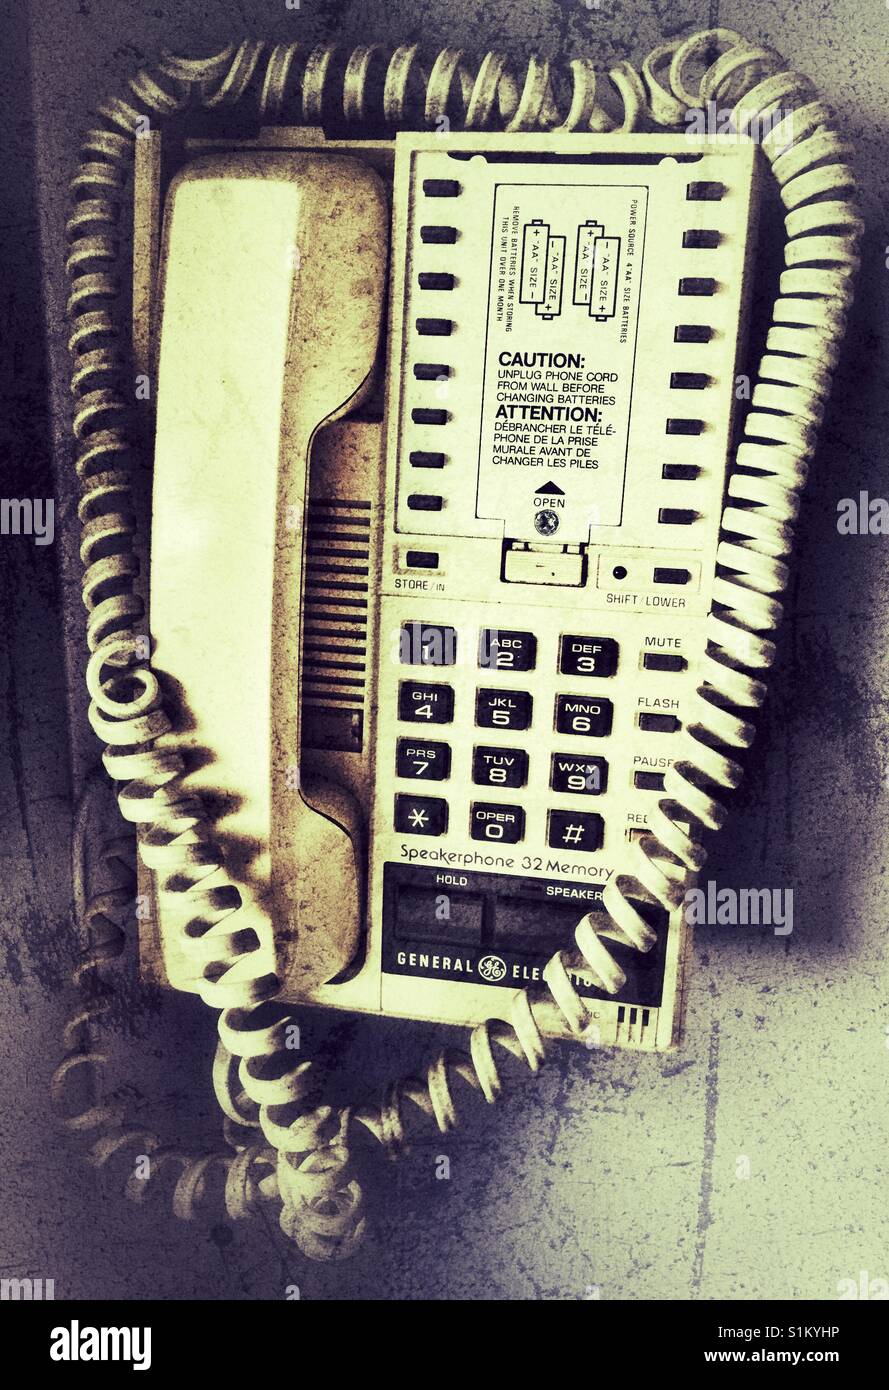 Old wall touch tone telephone. Stock Photo